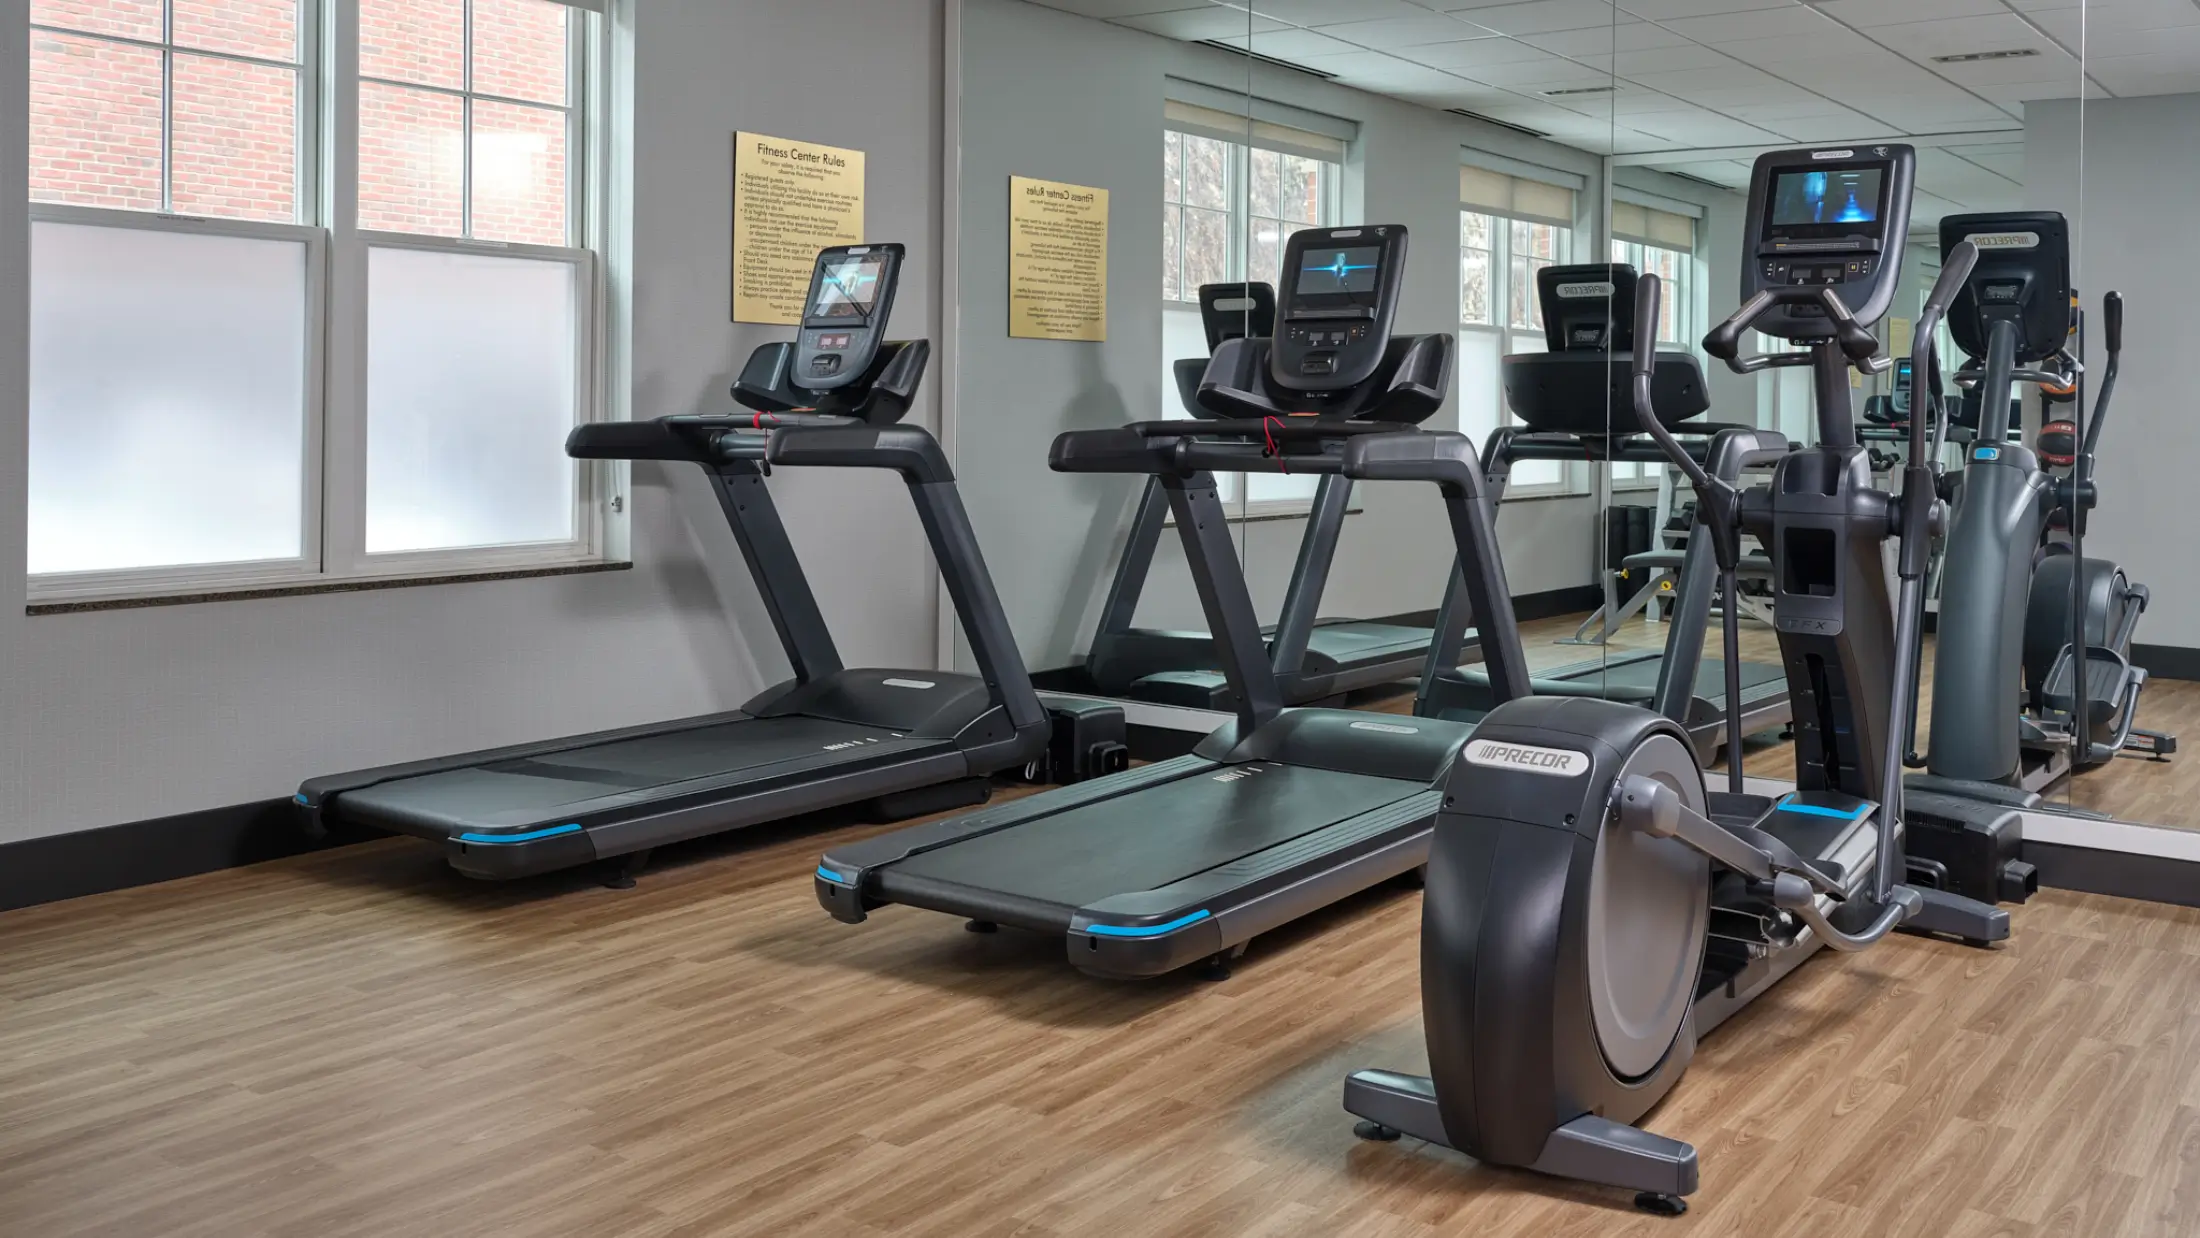 New Precor equipment in fitness room at Six South St Hotel in Hanover, New Hampshire.